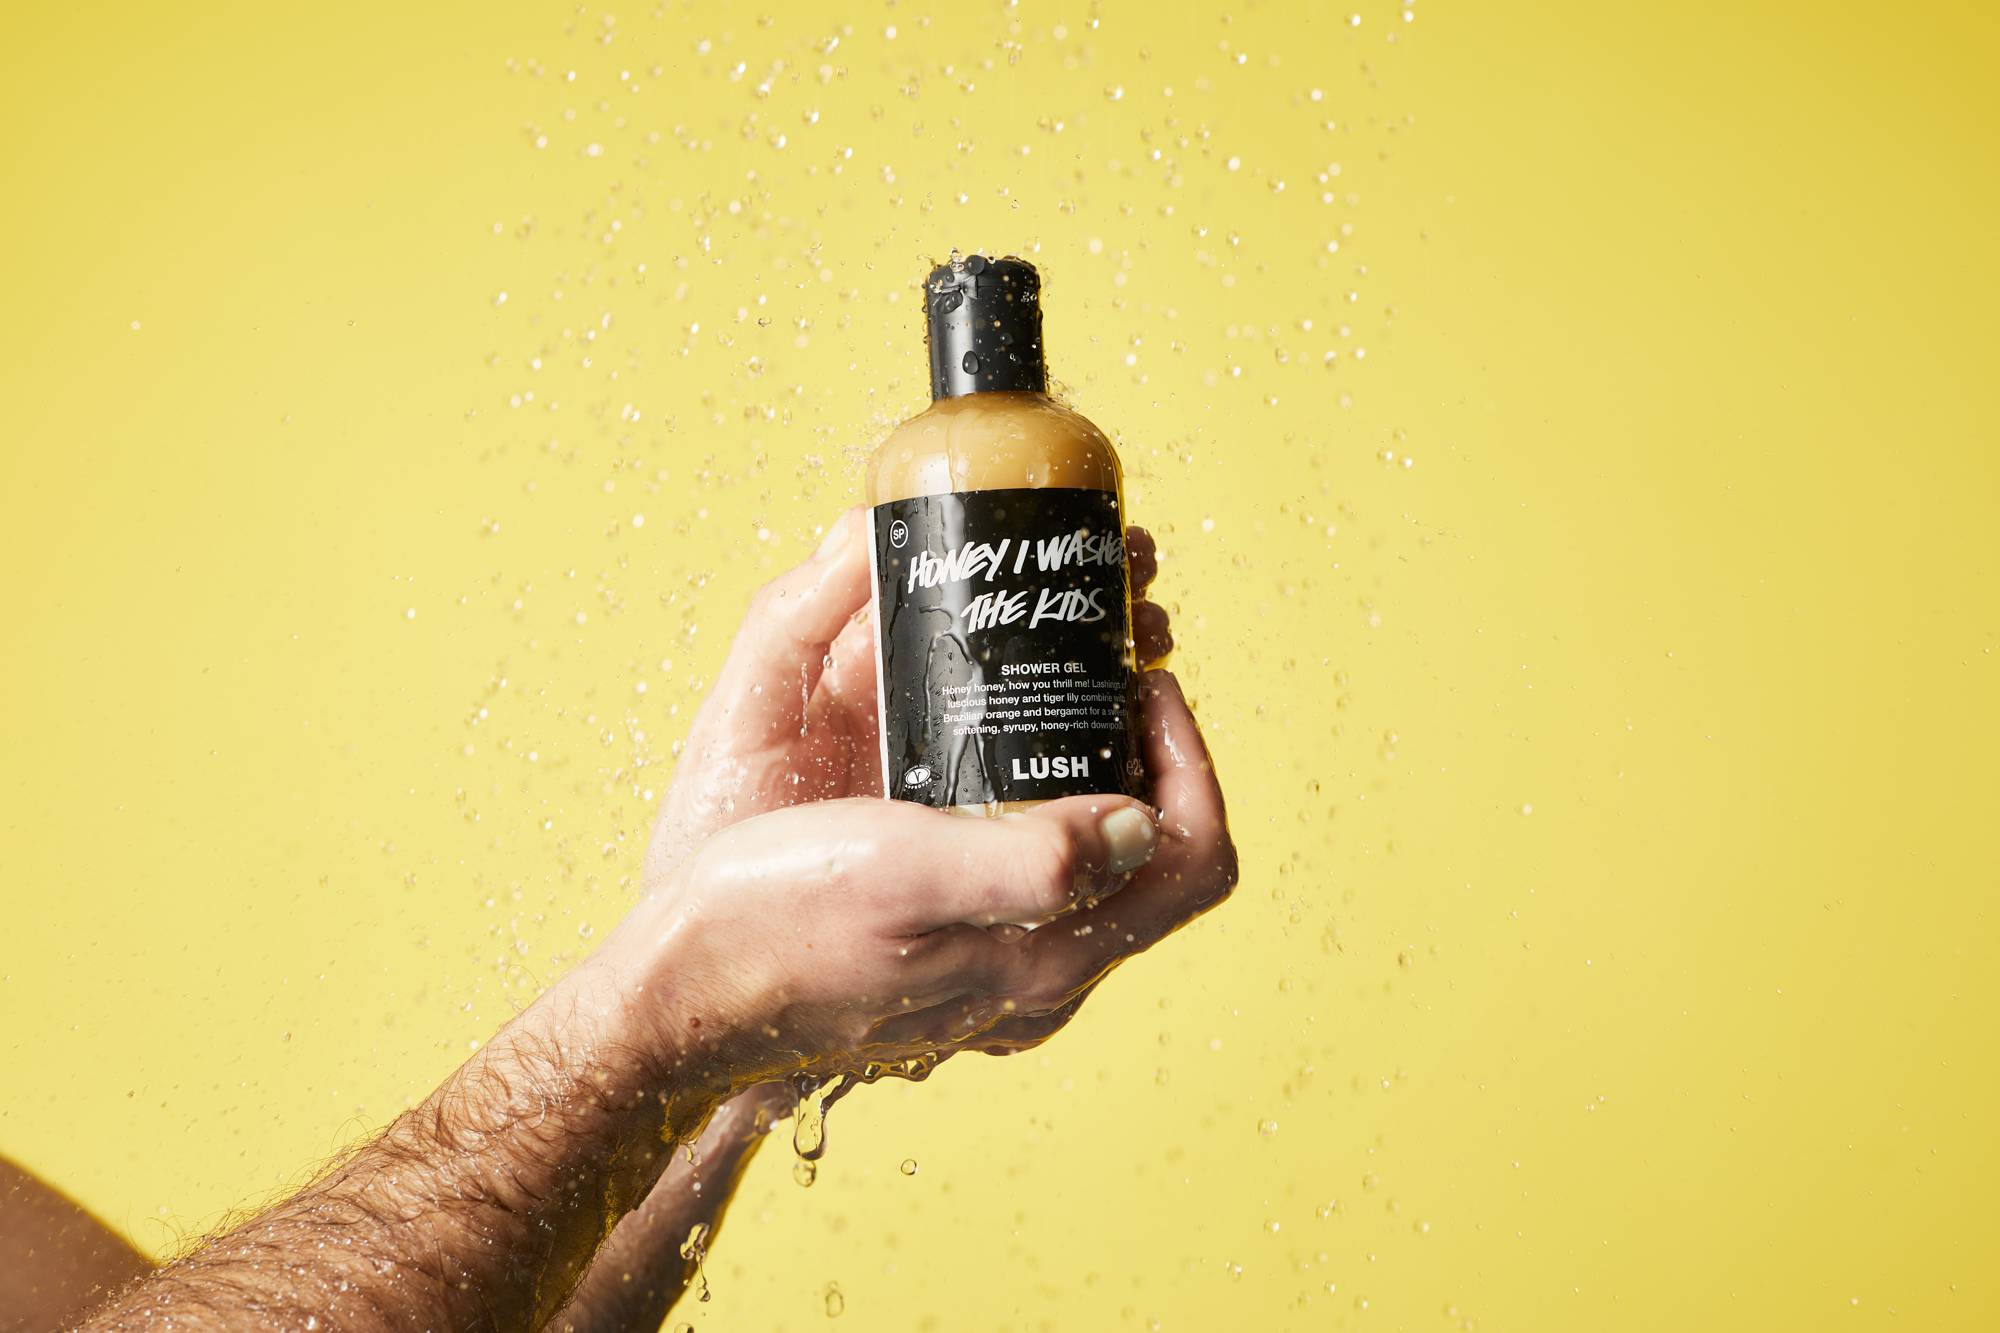 Shower water runs over a bright yellow background as we see a close-up of hands holding the shower gel bottle full of honey gel.